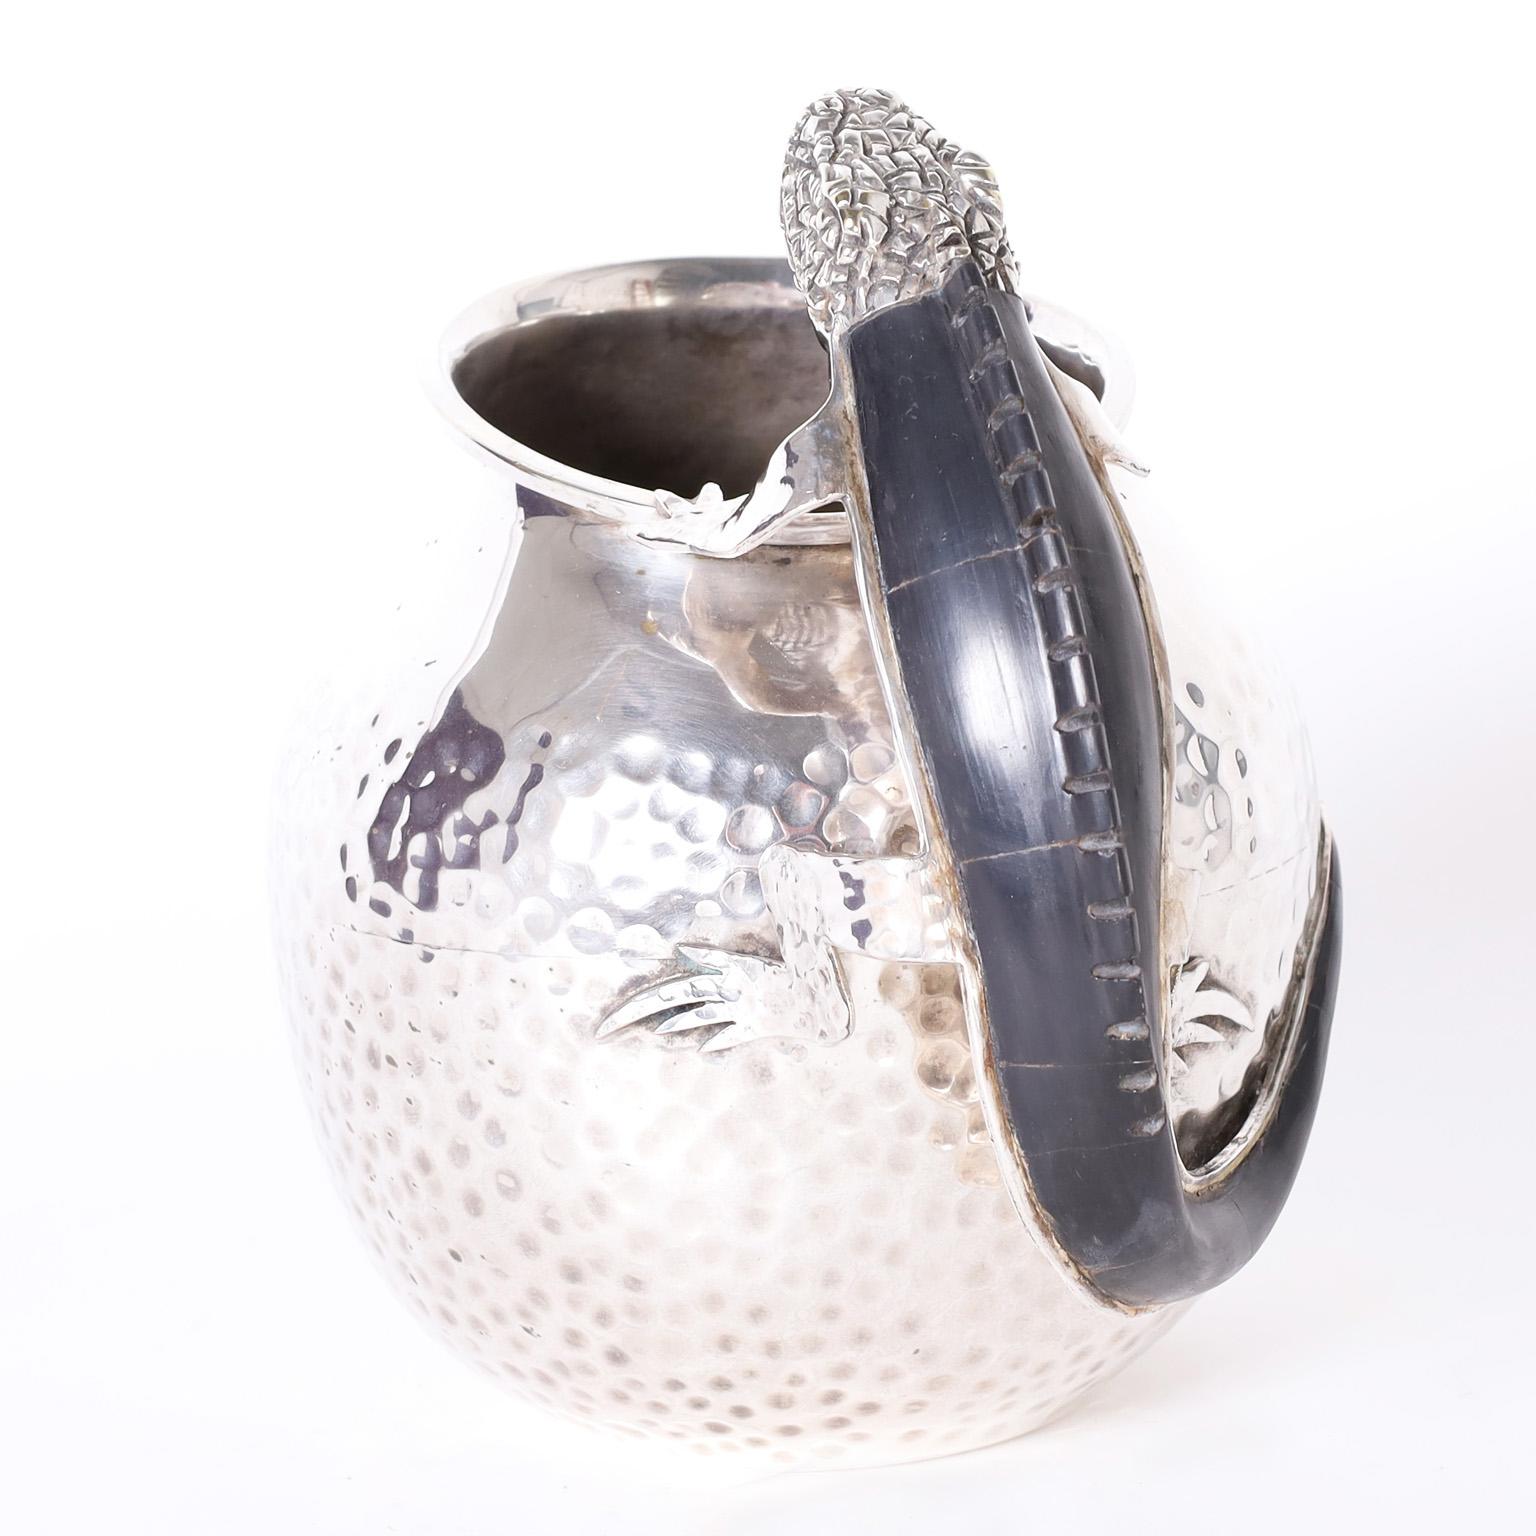 Eye catching mid century silver plate on copper hand crafted pitcher featuring a lizard handle with a black stone back. Attributed to Castillo.